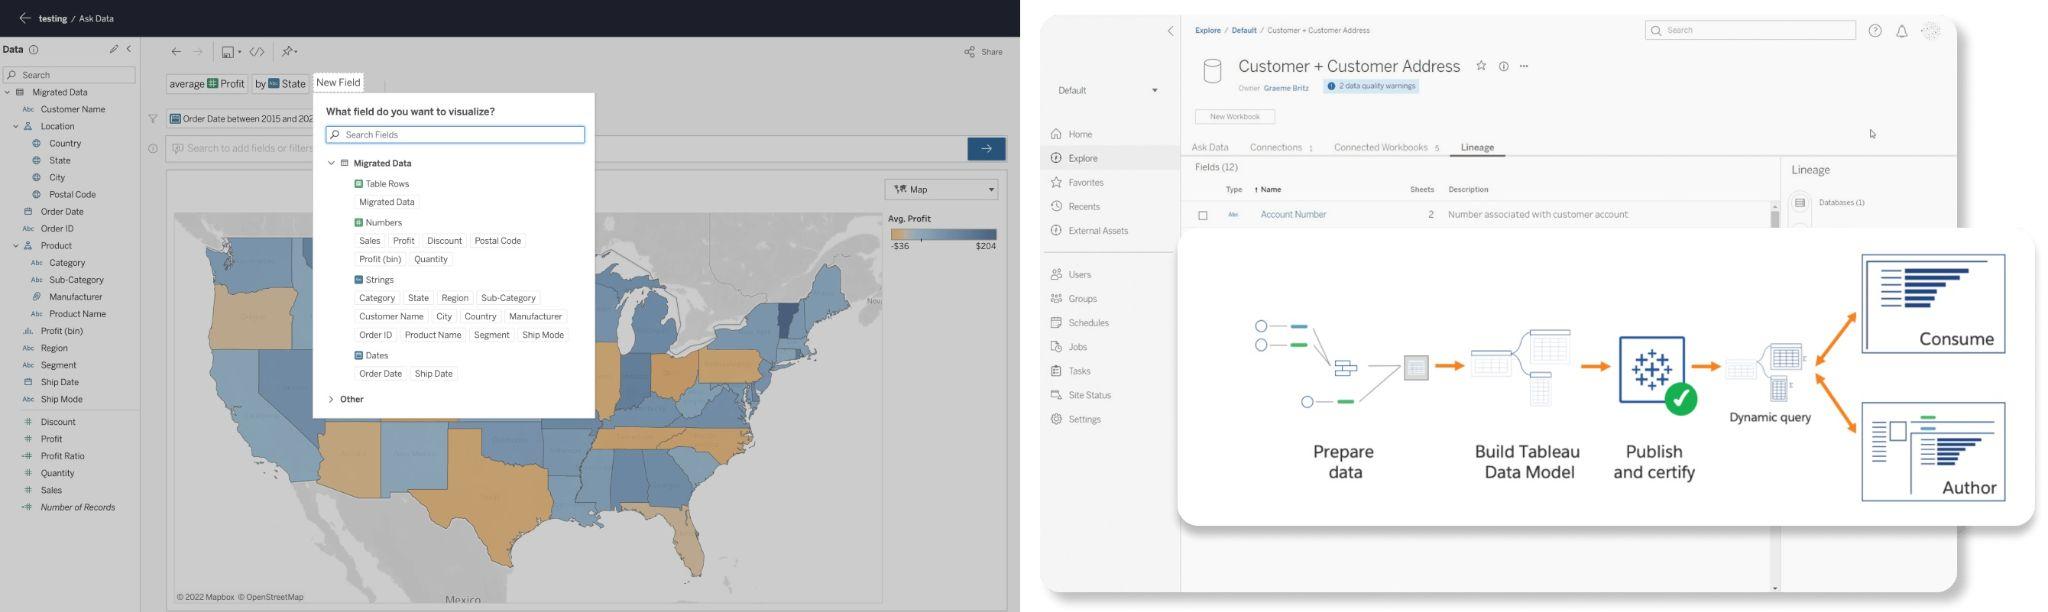 Omnichannel Retailing: Tableau Data Collection and Analysis Tool